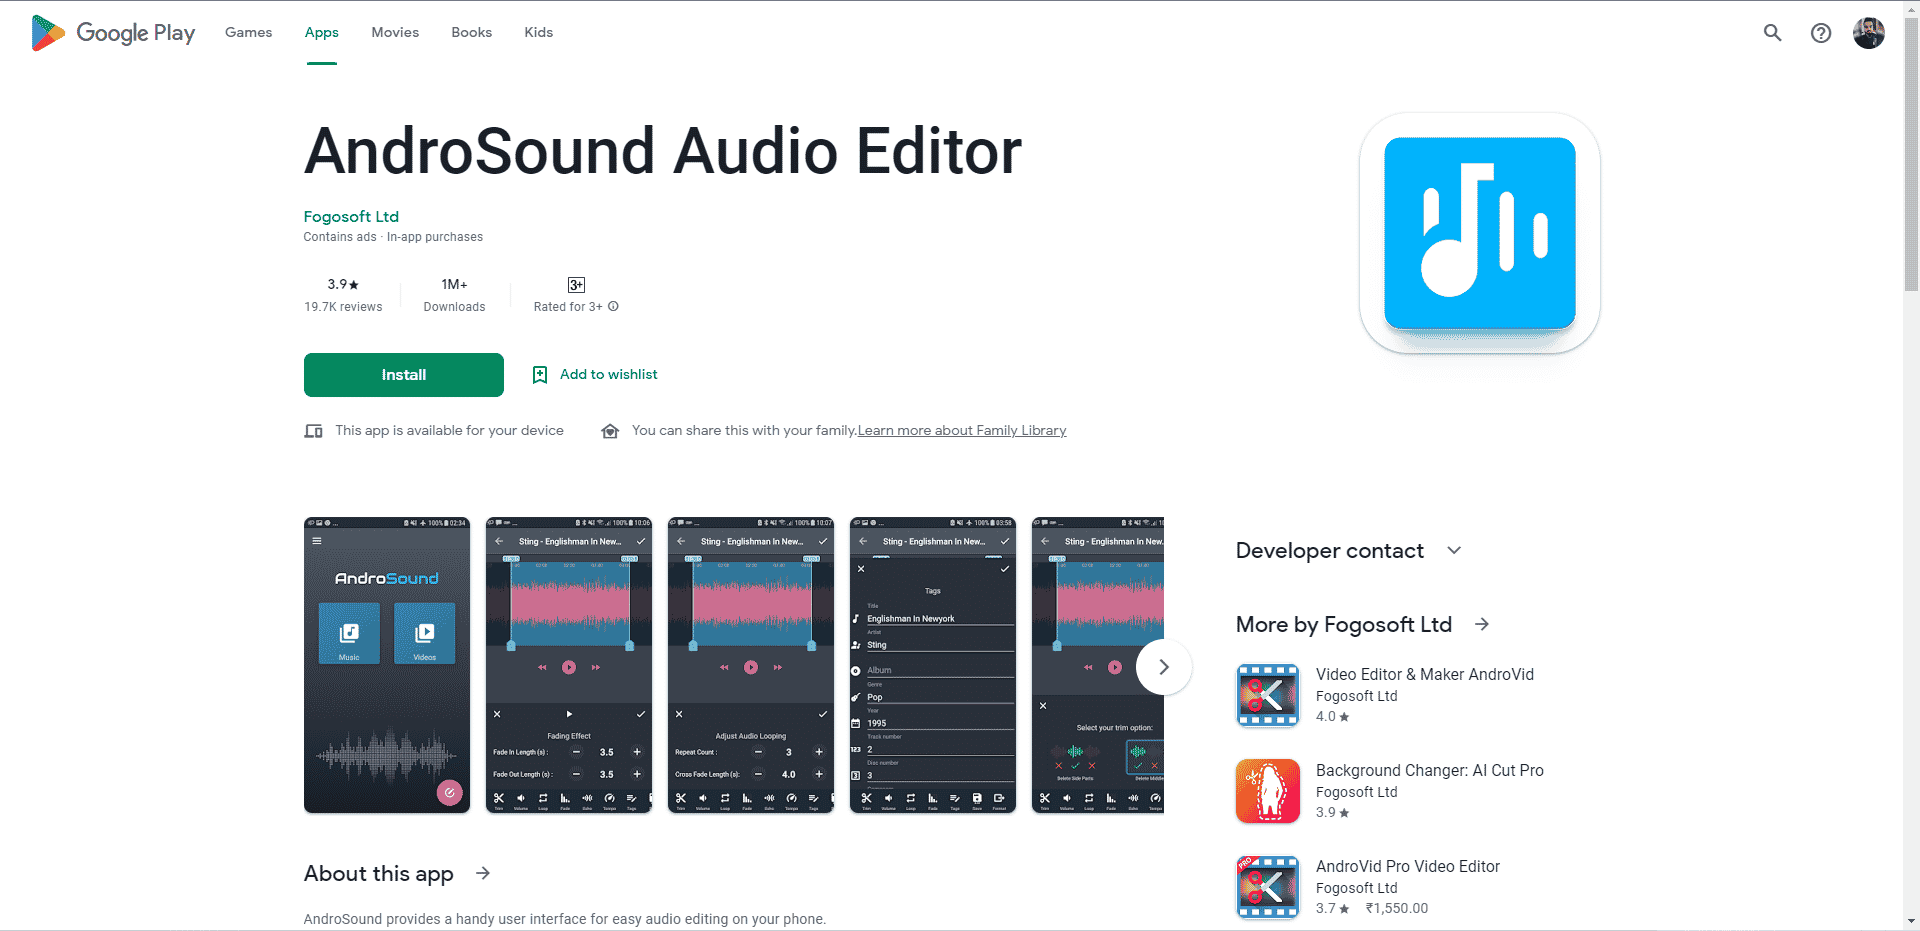 AndroSound Audio Editor Play Store webpage